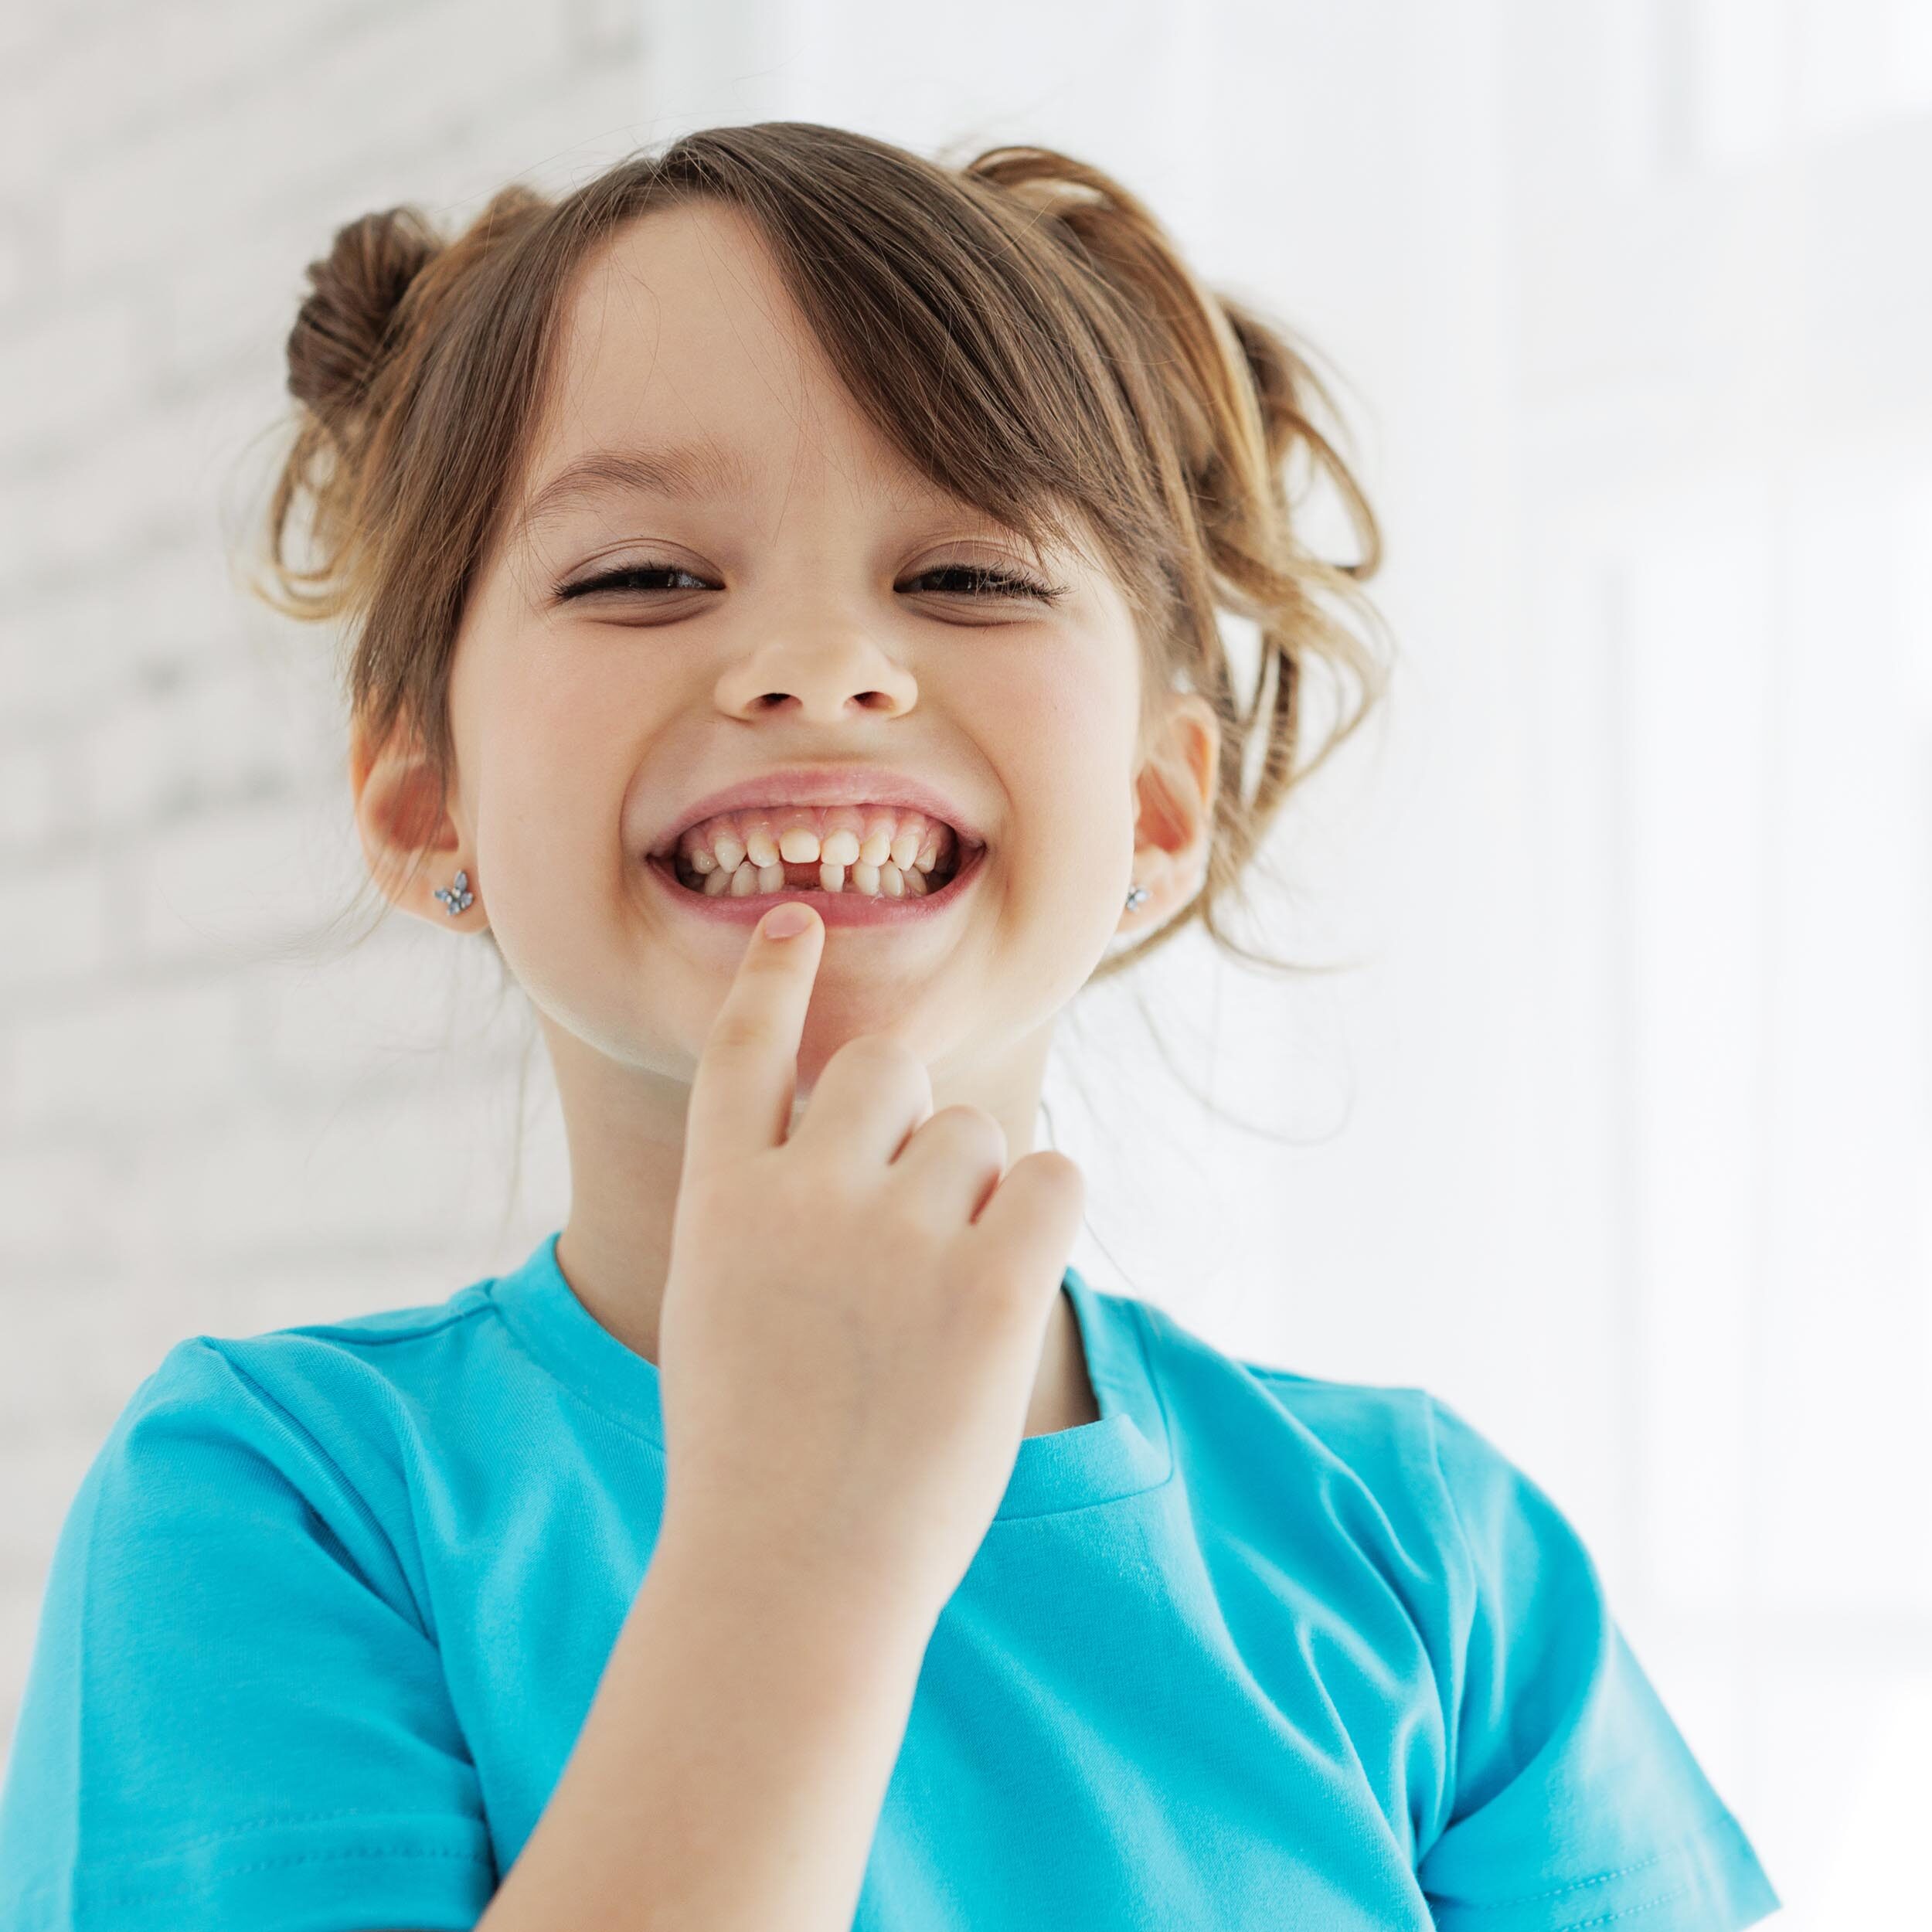 A smiling girl with her finger on her lips, displaying a space where her baby tooth once was, radiating joy.